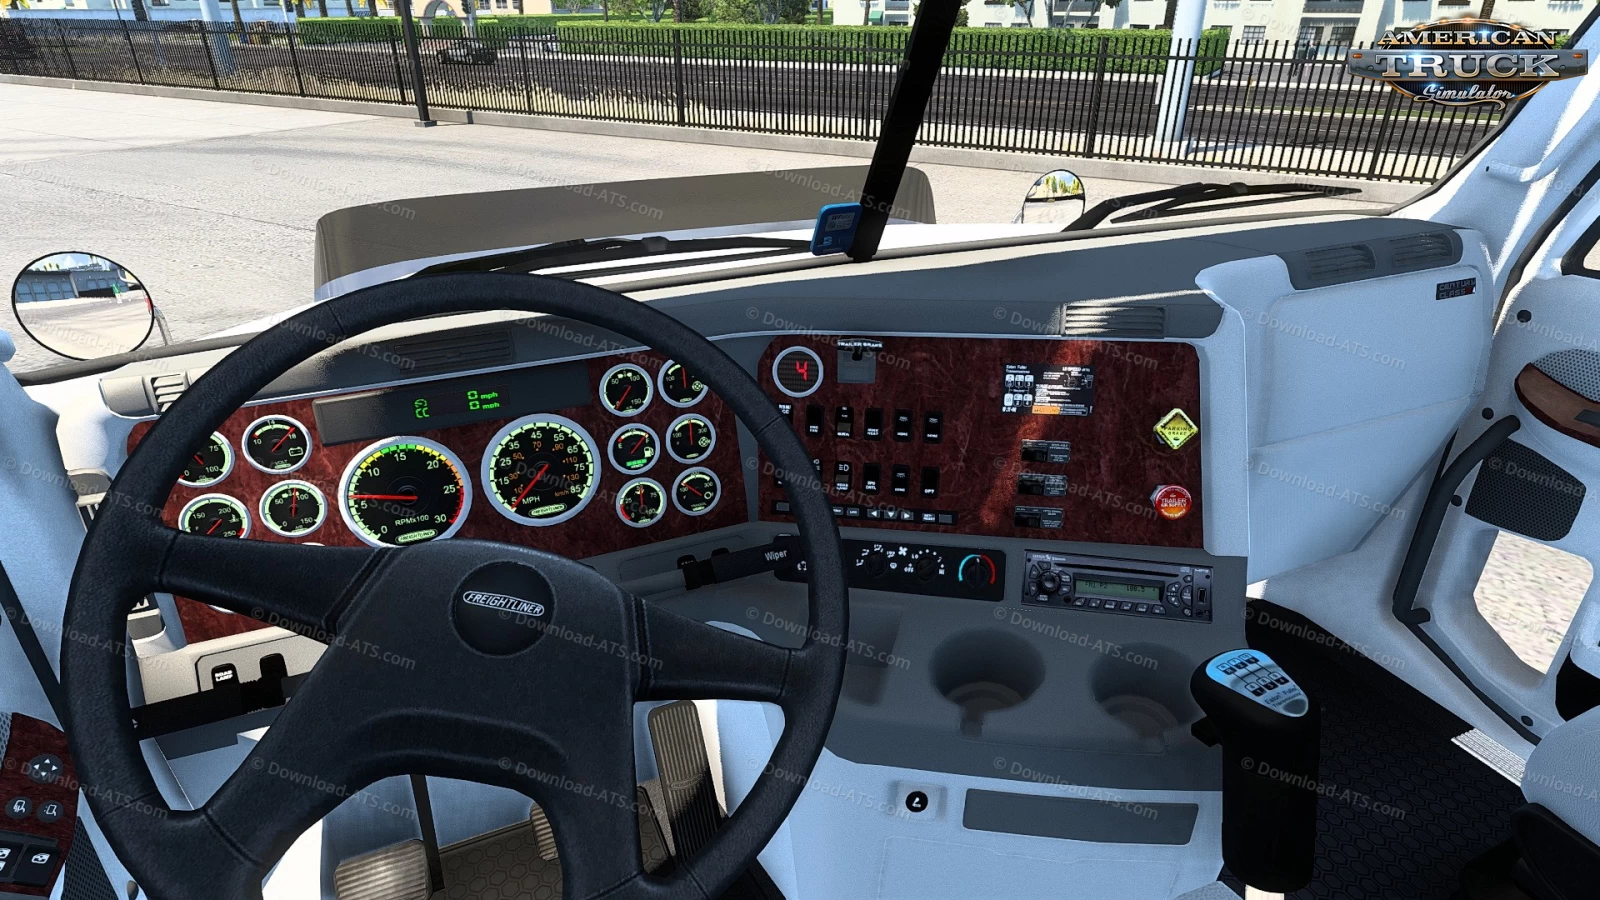 Freightliner Century Class Truck v5.5 (1.48.x) for ATS